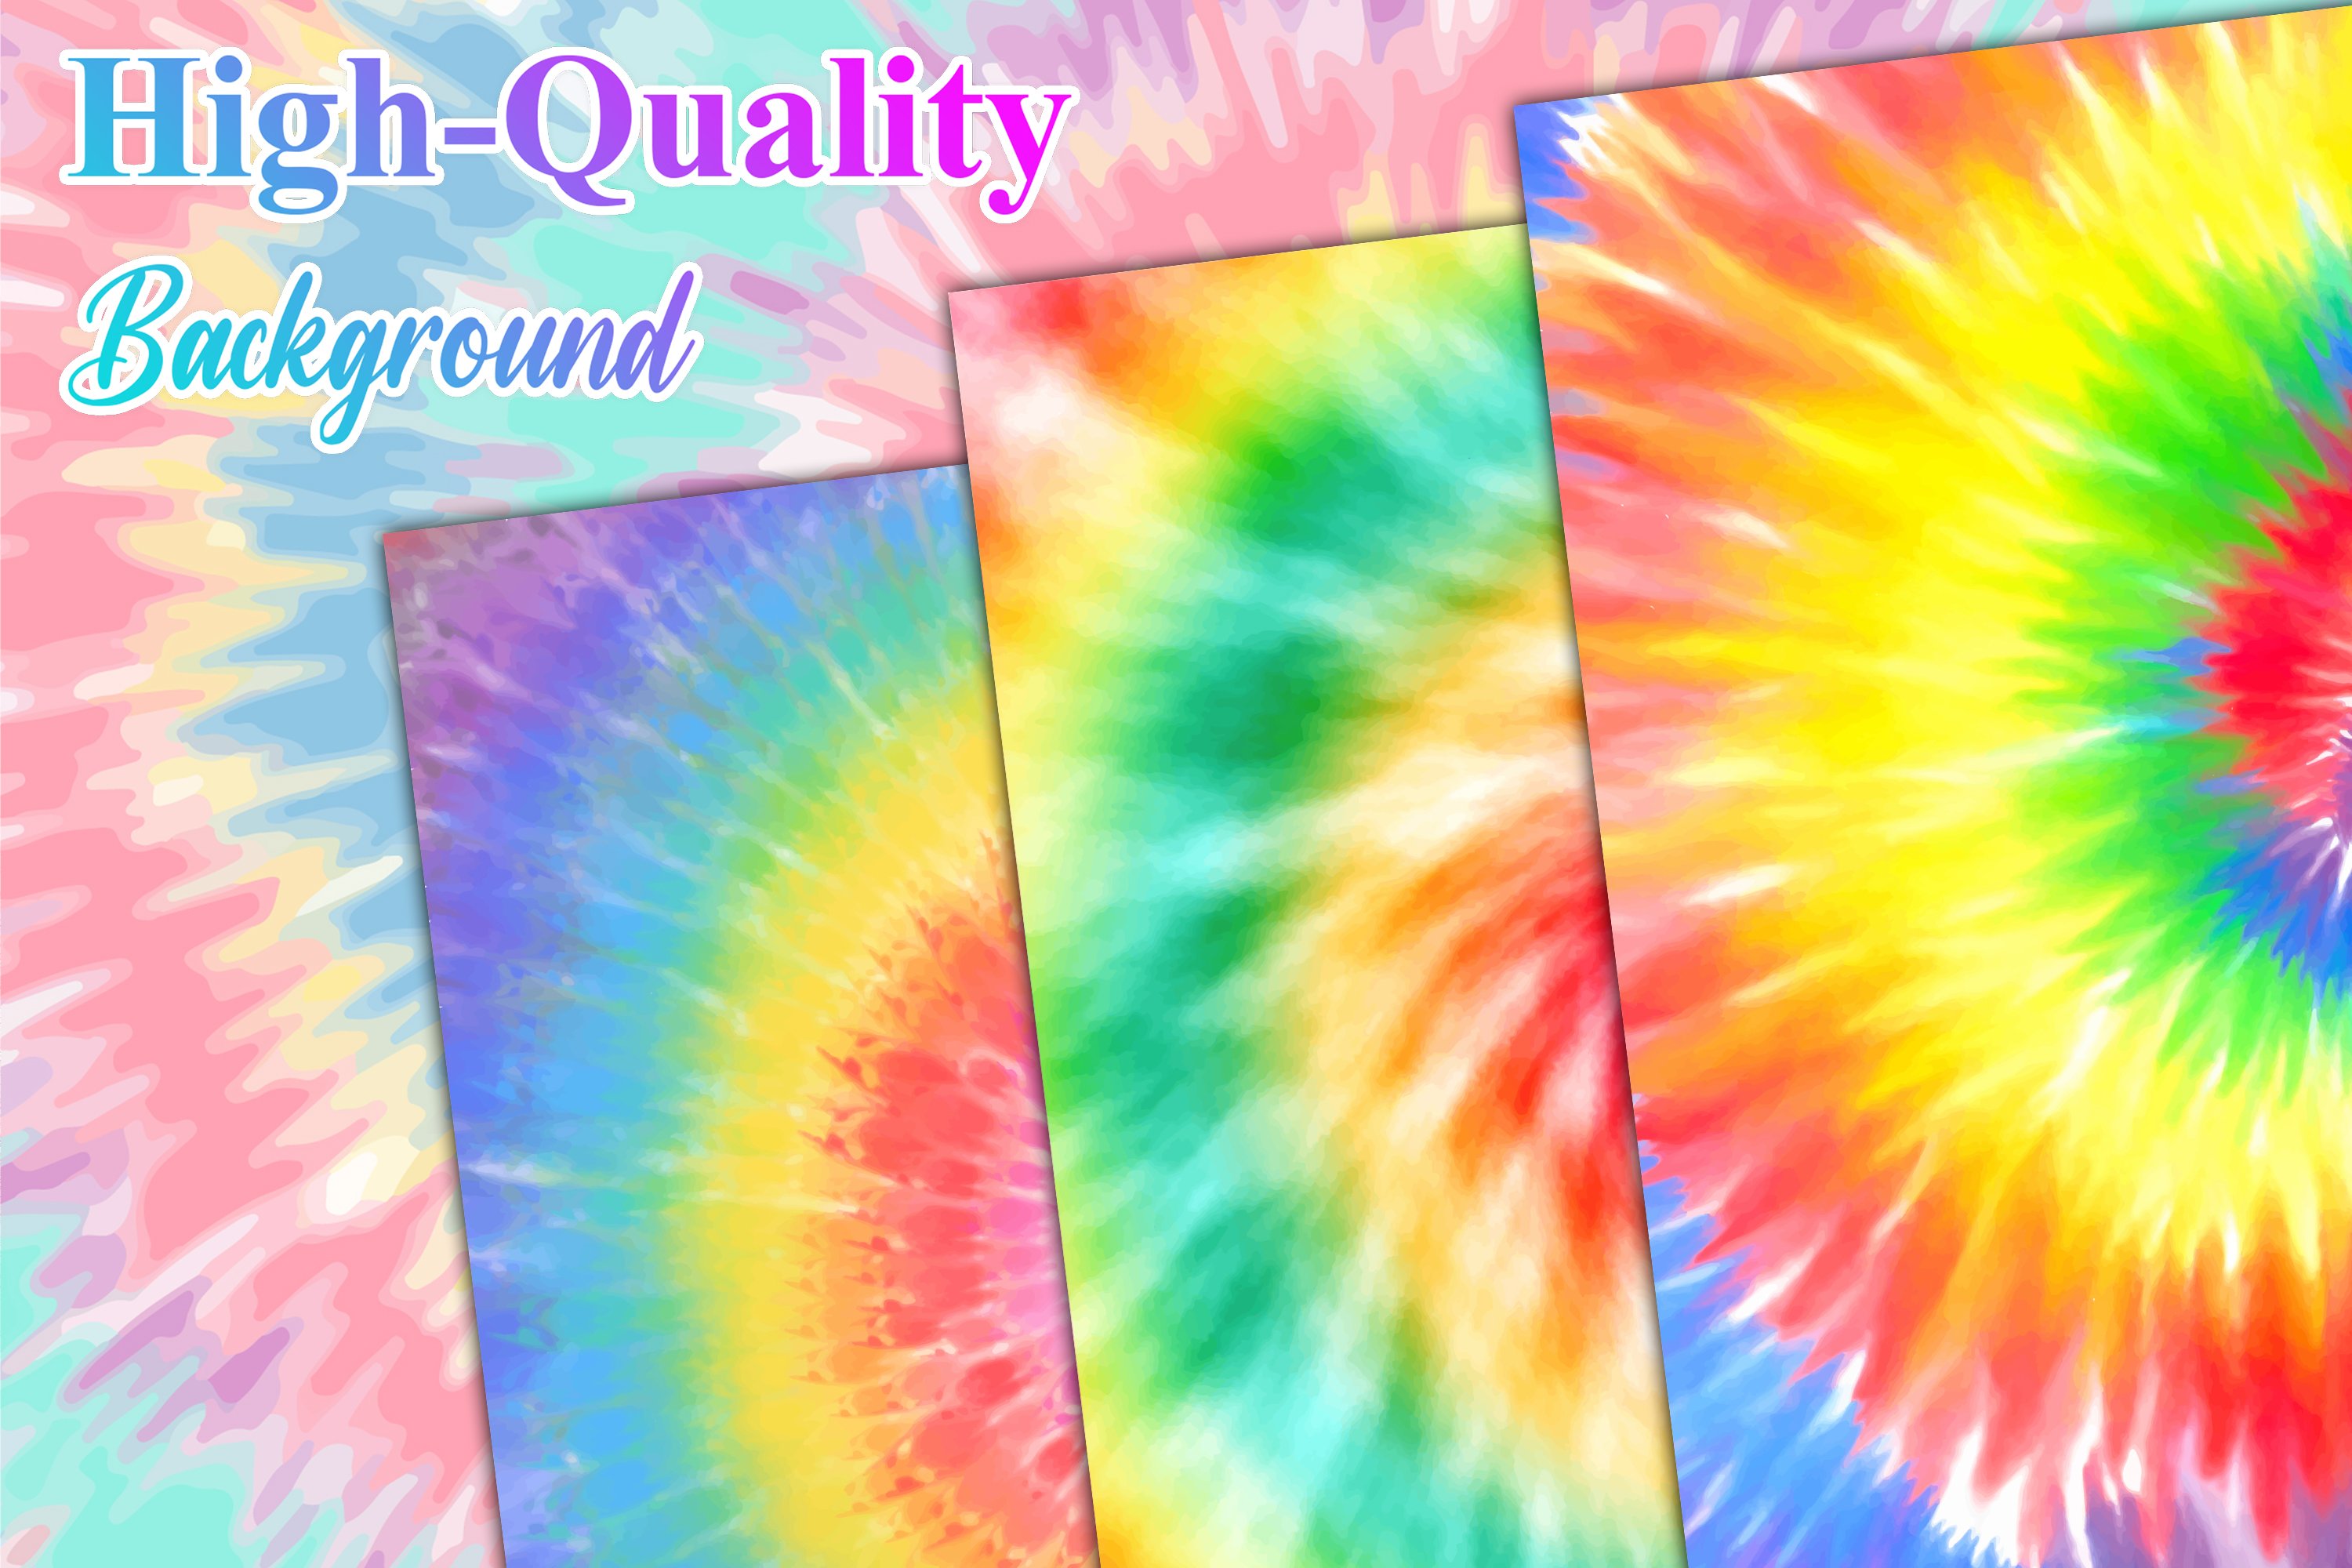 Green and Yellow Tie Dye Sublimation Design Download 